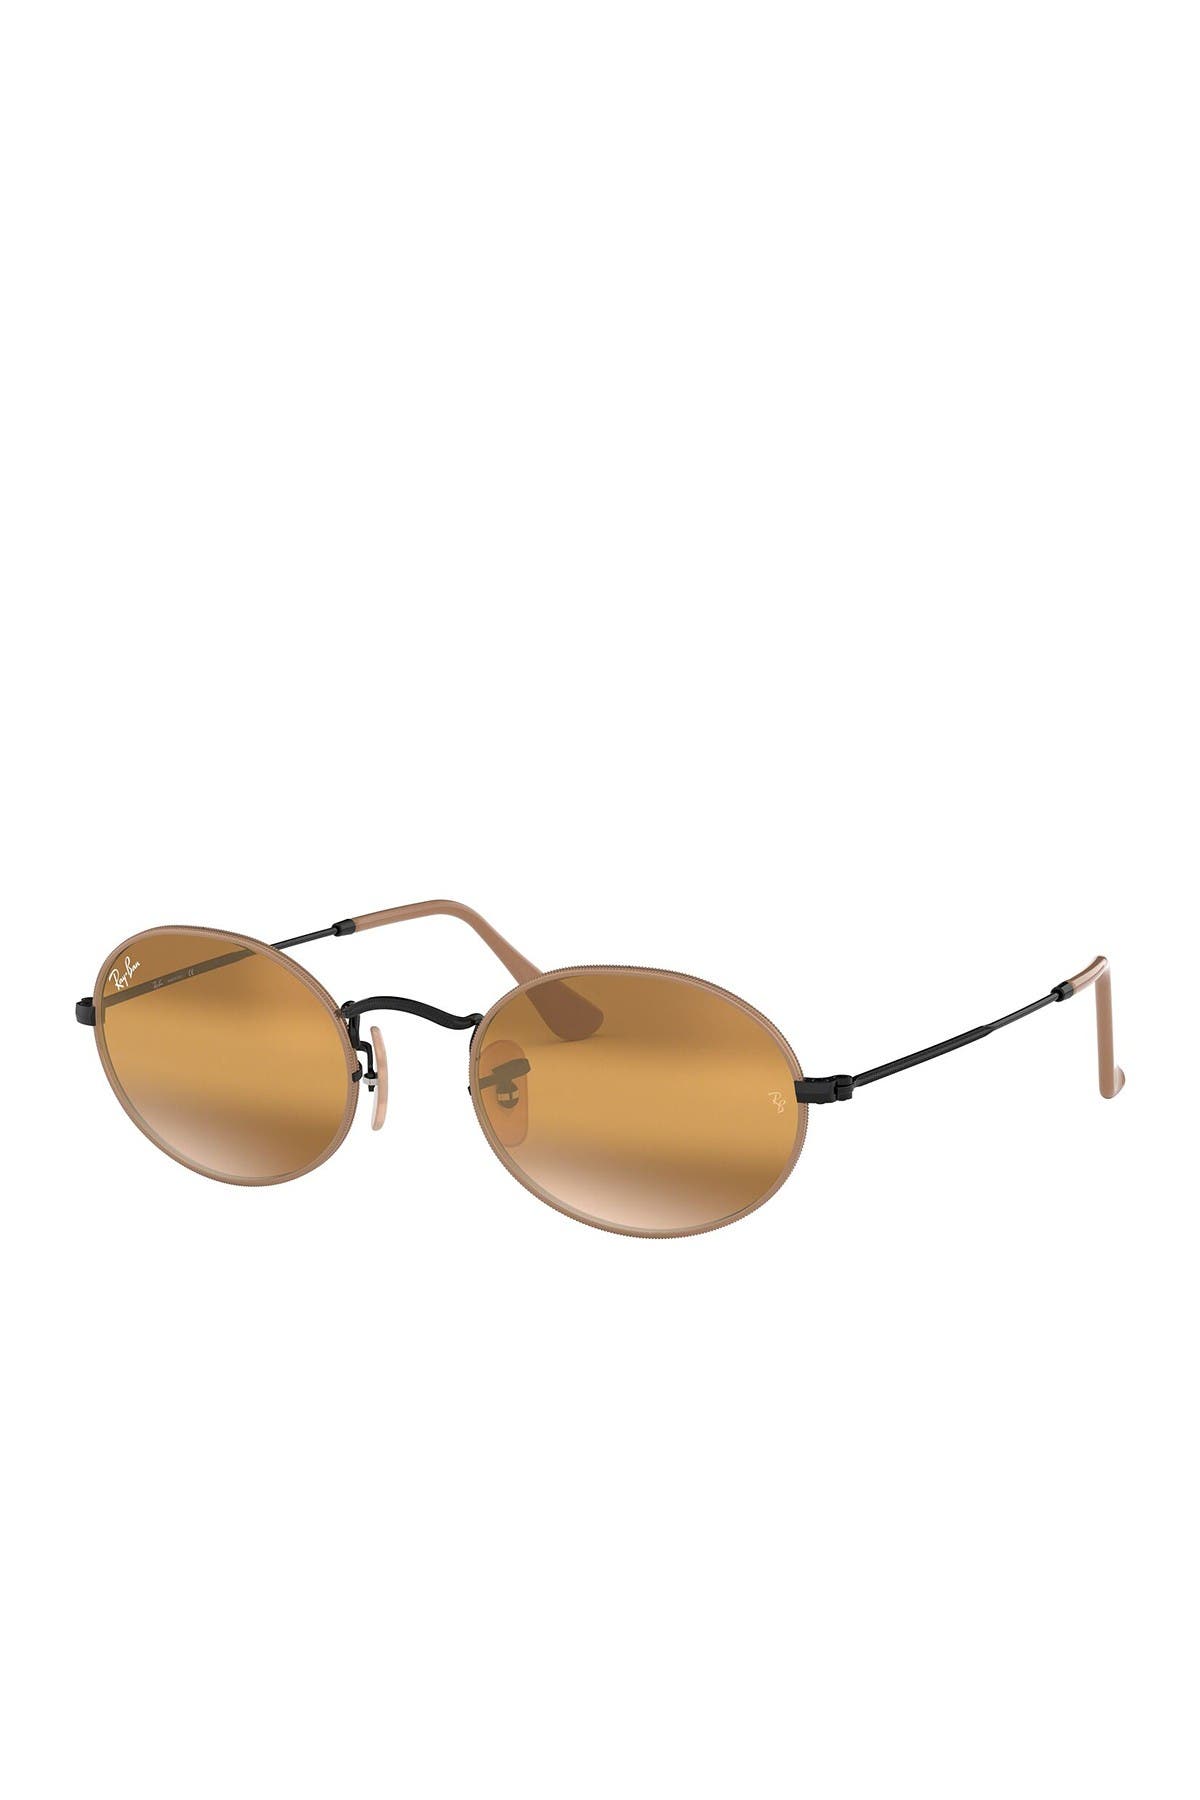 Ray-Ban | 51mm Oval Sunglasses | Nordstrom Rack